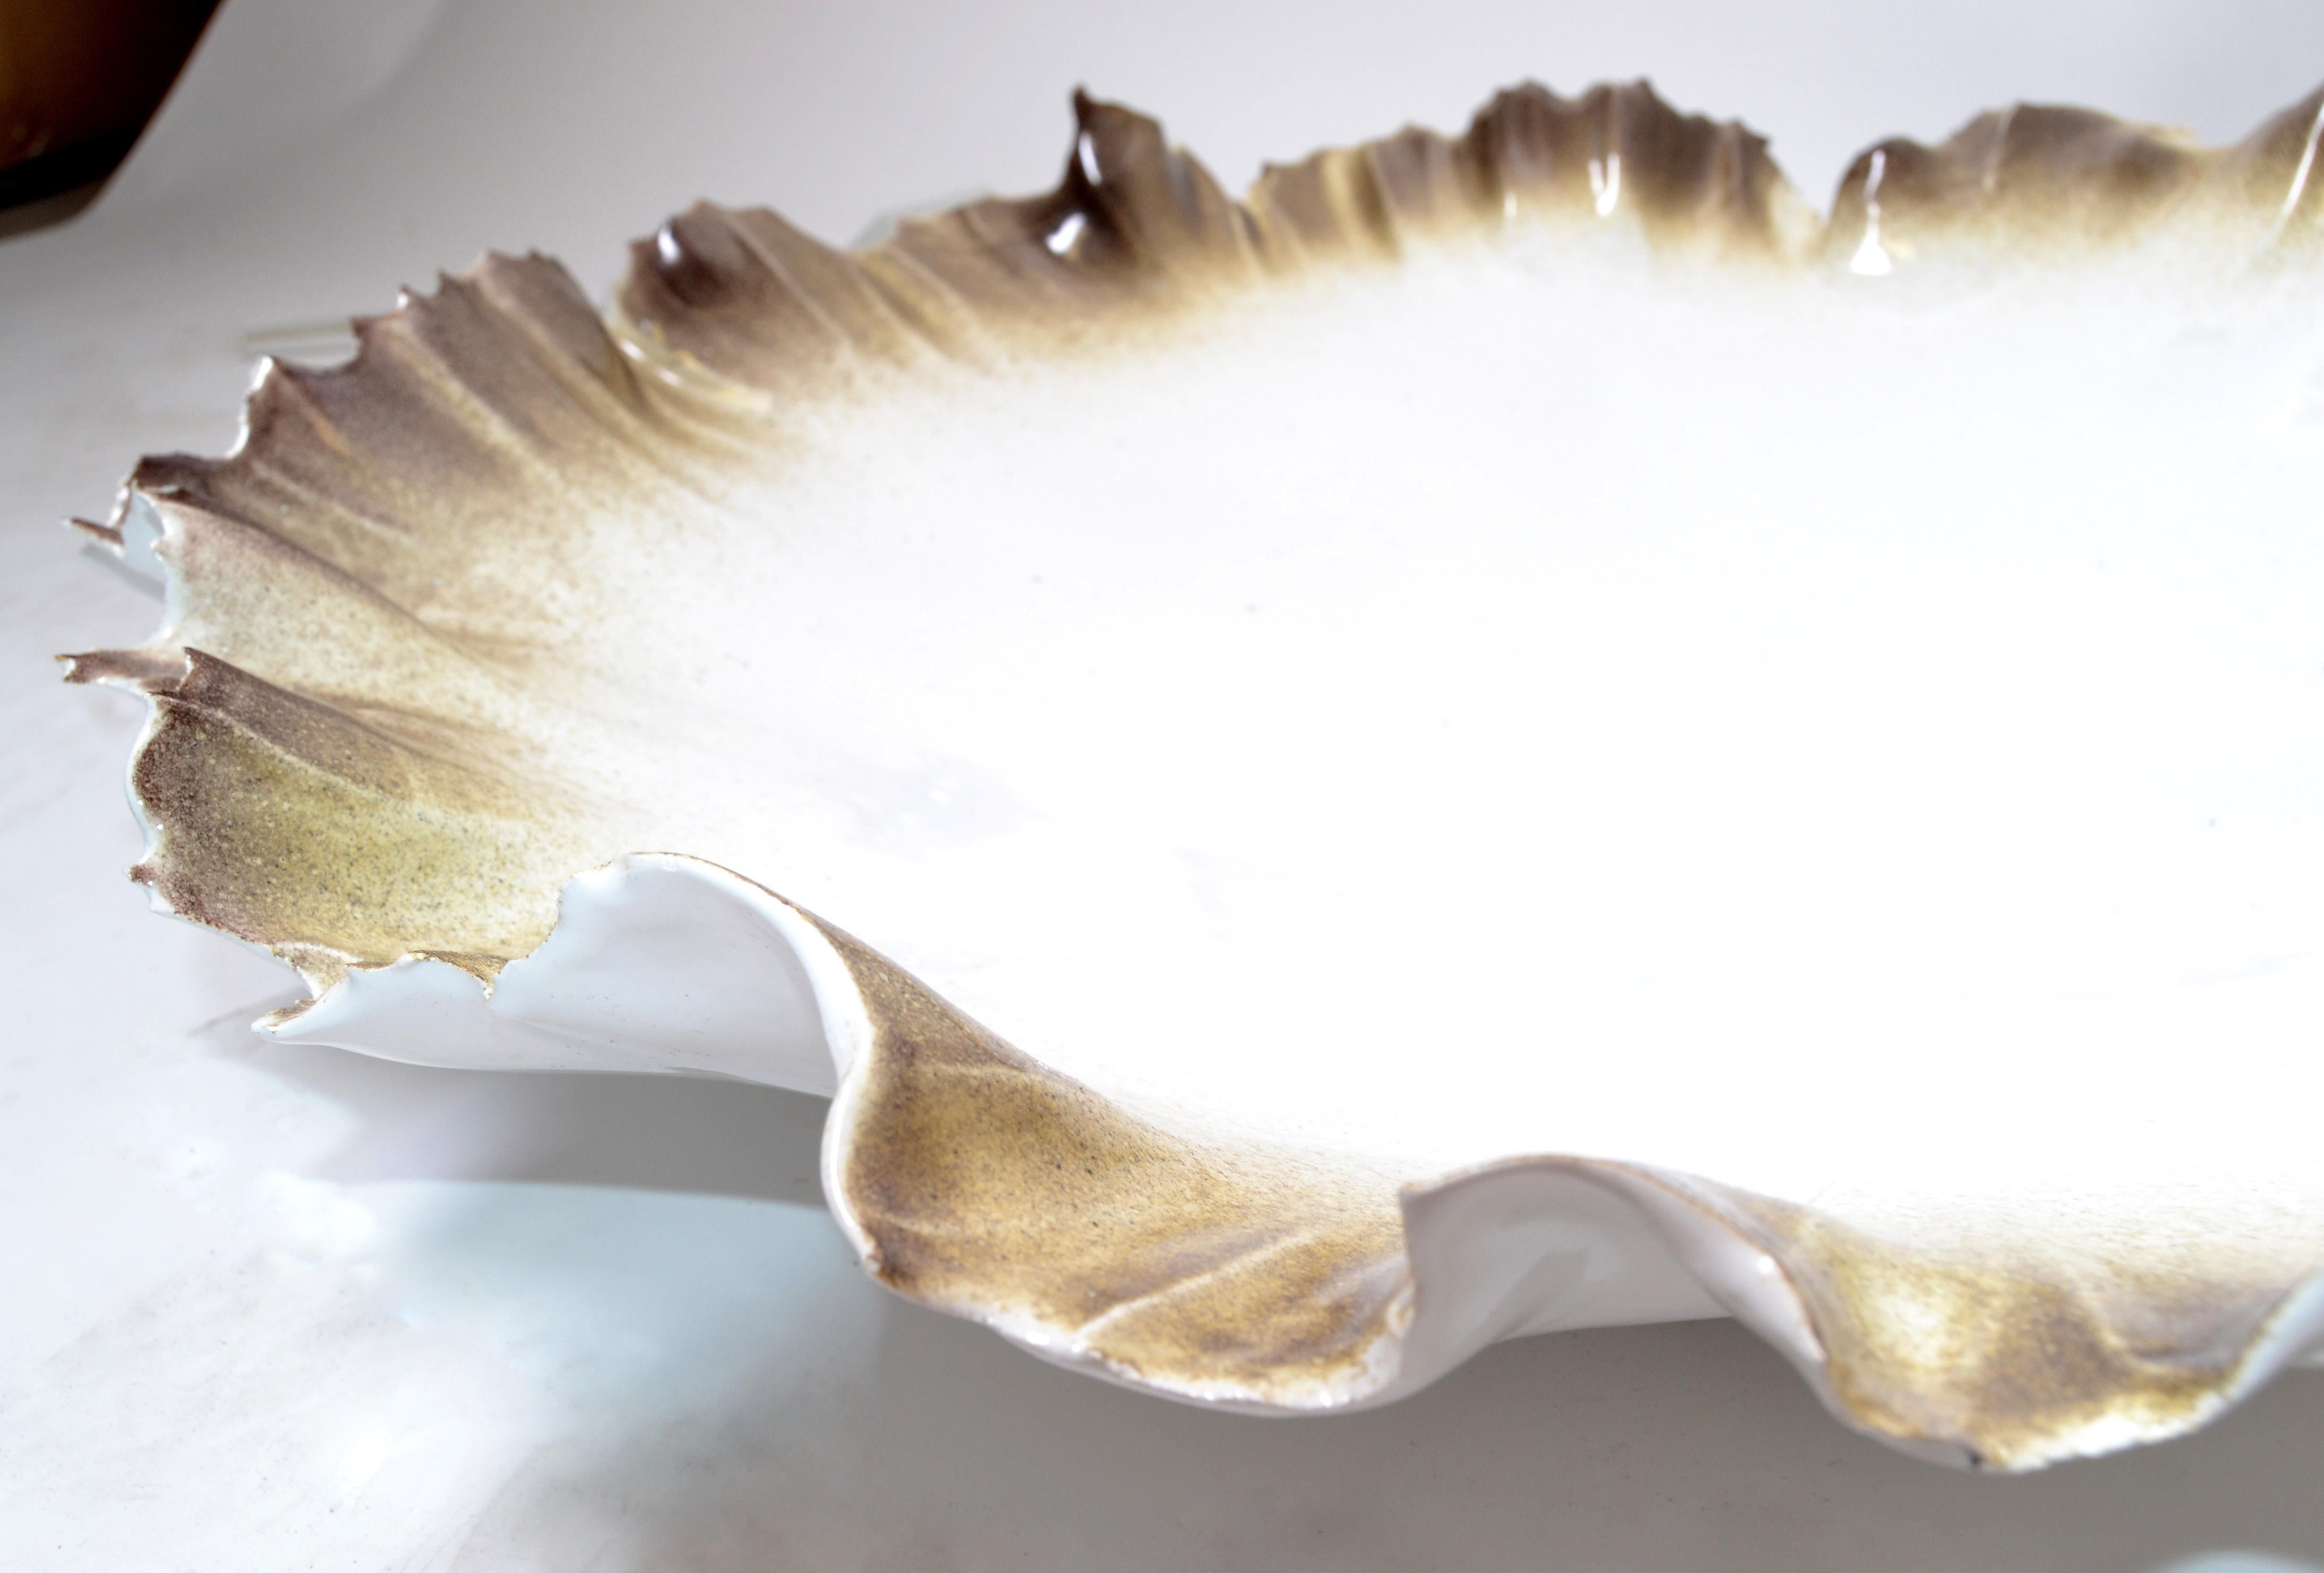 American Signed Large Glazed Ceramic Seashell Bowl Centerpiece in White and Sand Color For Sale